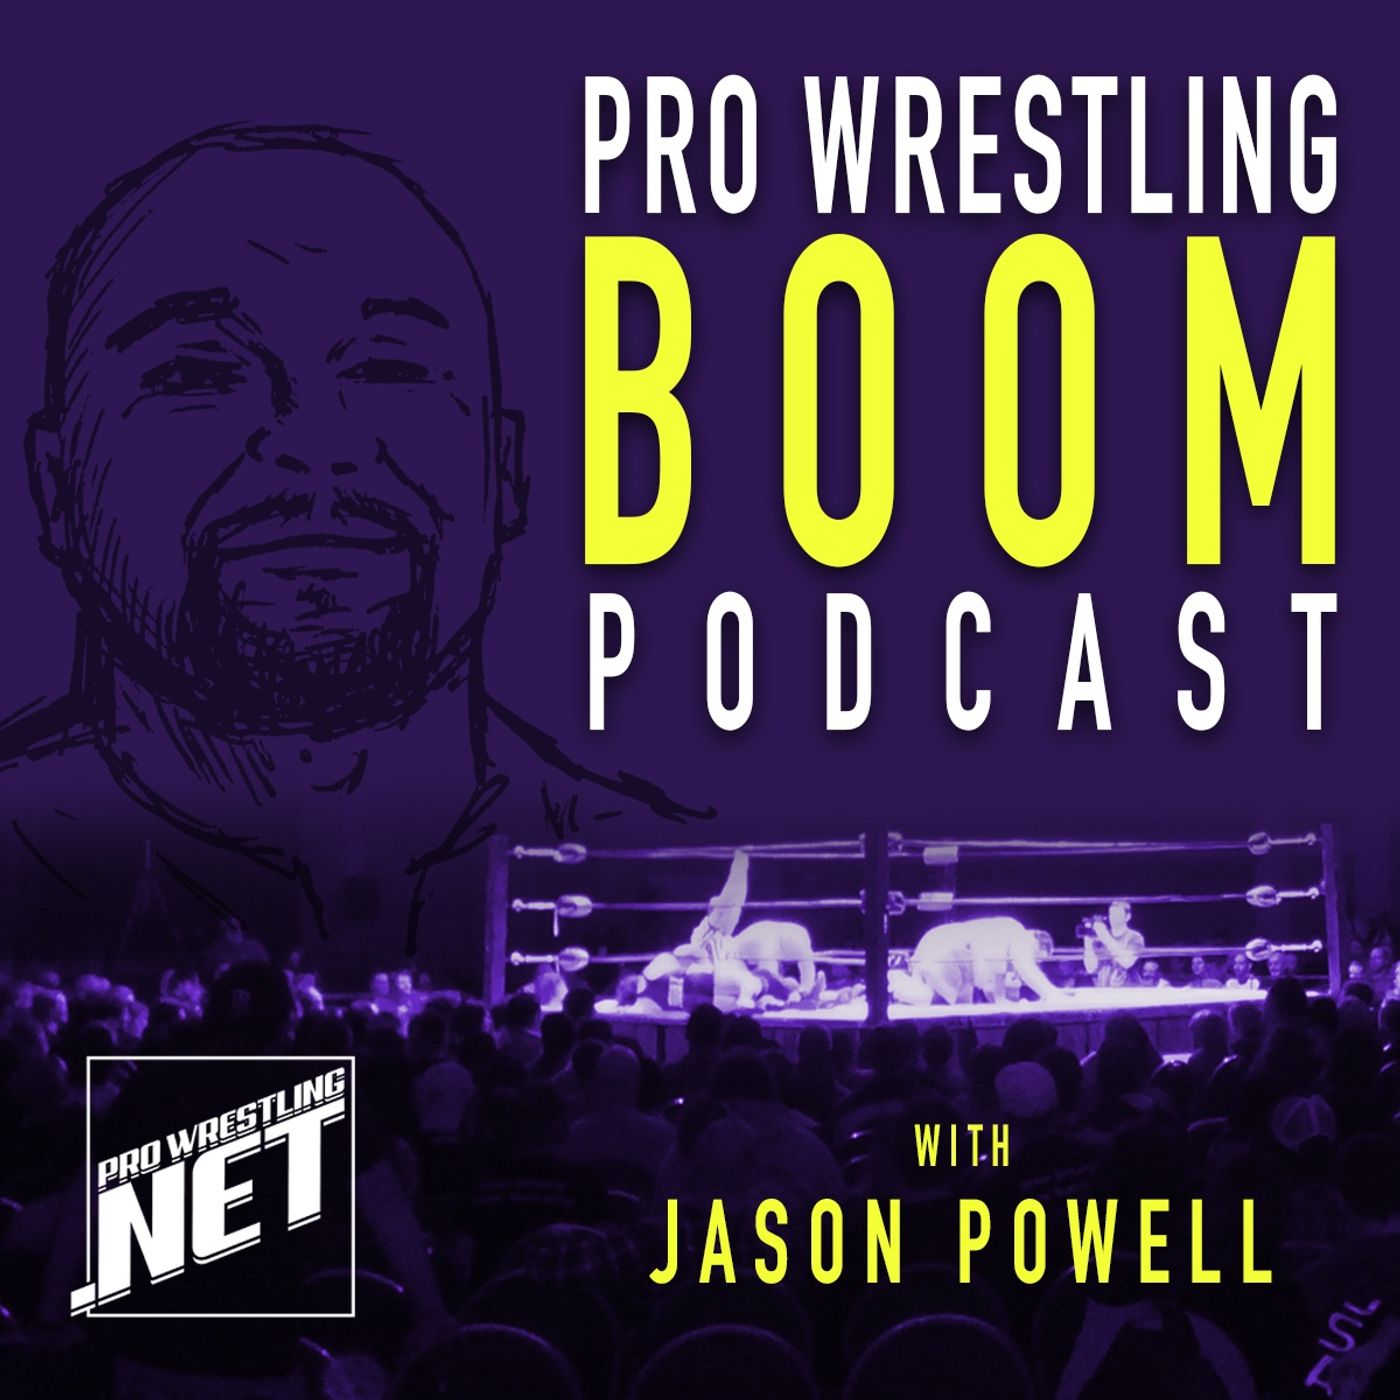 07/14 Pro Wrestling Boom Podcast With Jason Powell (Episode 166): Colin McGuire on Paul Orndorff, WWE MITB, Impact Slammiversary, ROH BITW